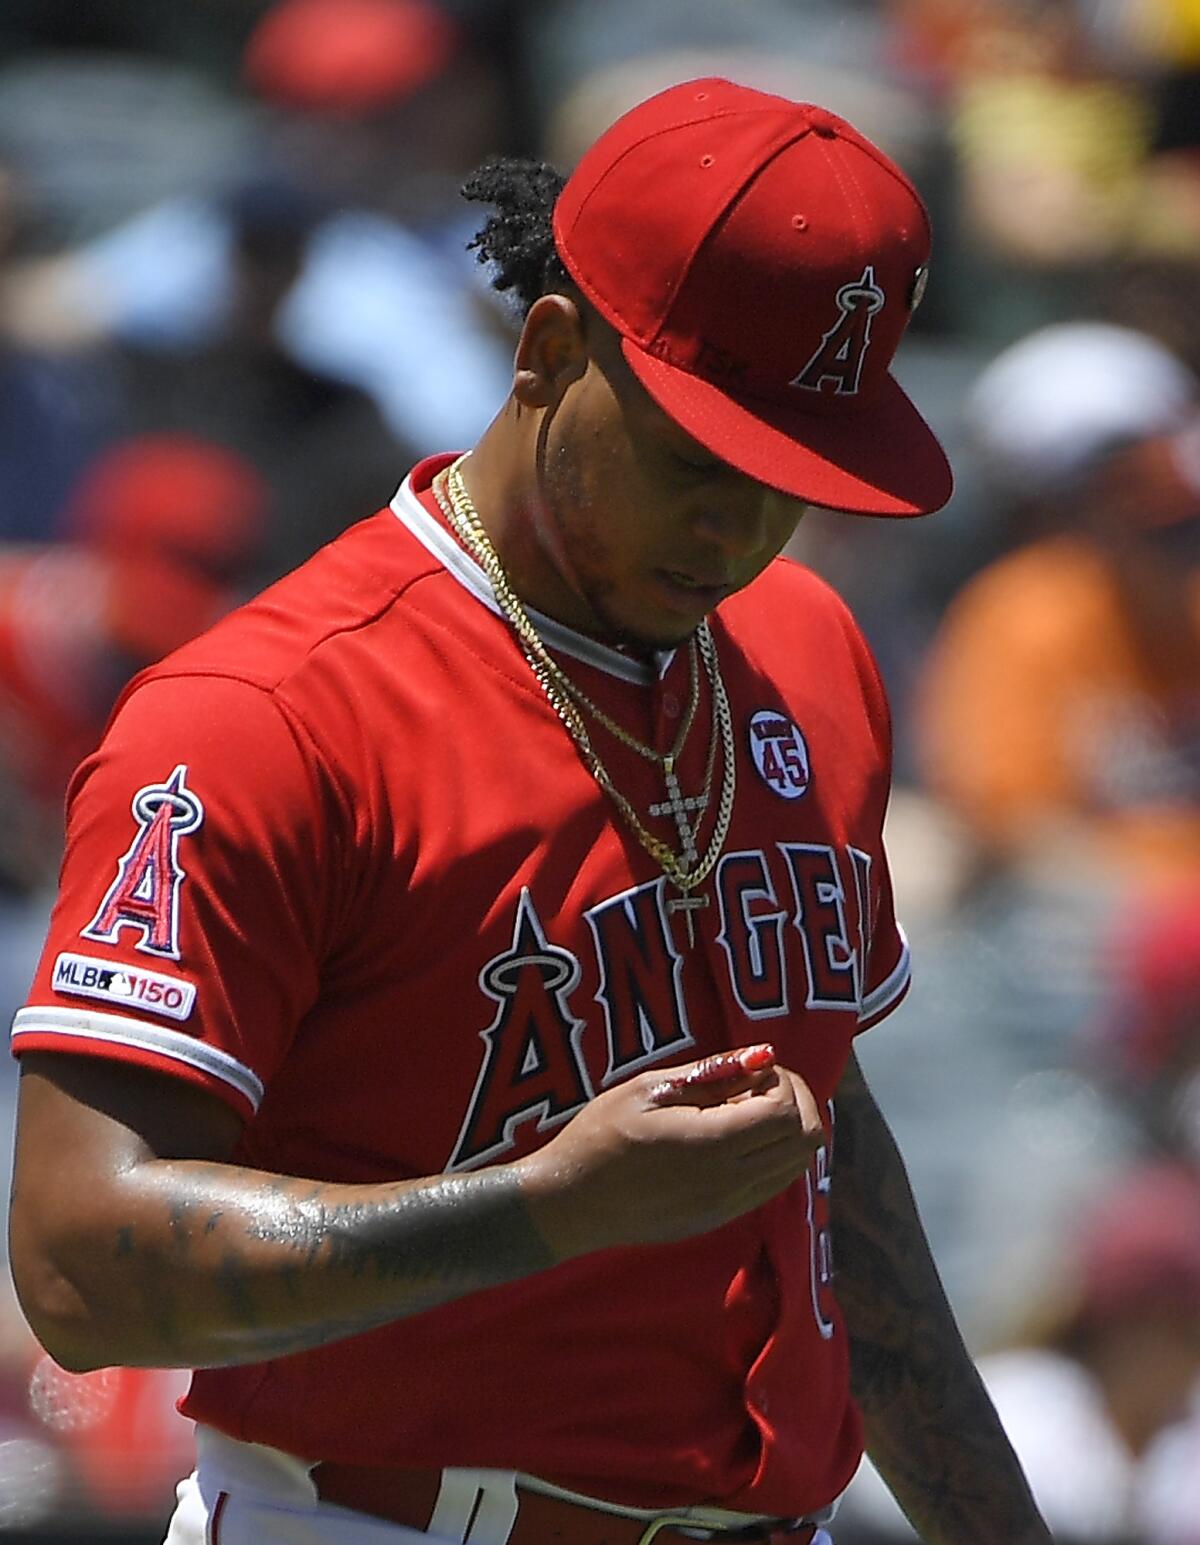 Angels starting pitcher Felix Pena looks at his bleeding thumb during the second inning of Sunday's 5-4 victory over the Baltimore Orioles.